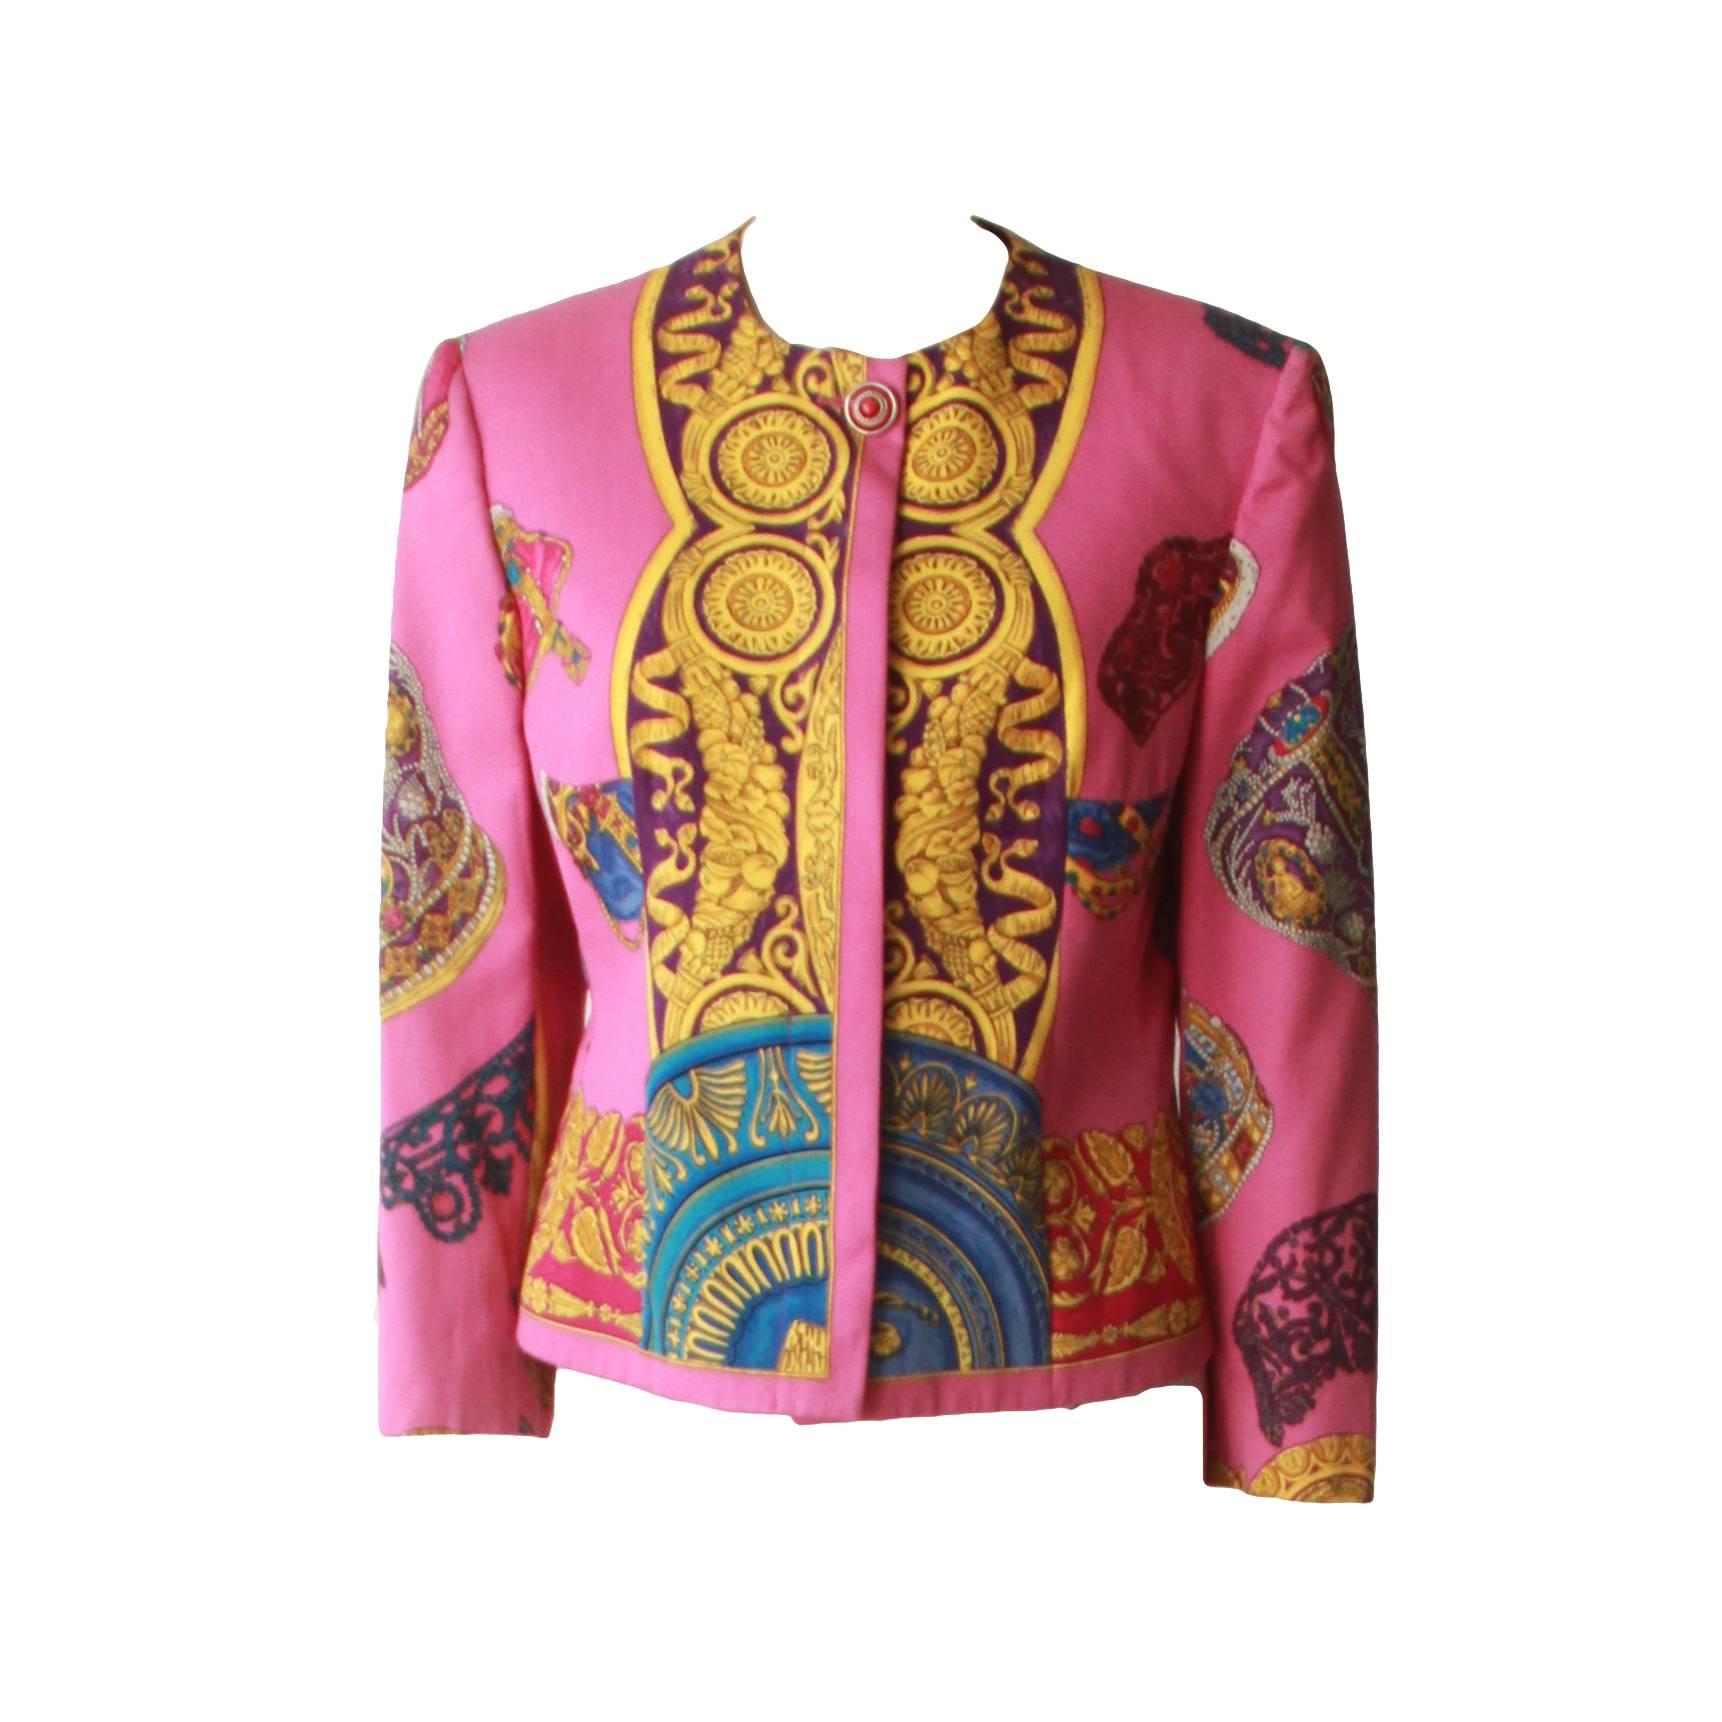 Gianni Versace Printed Jacket Spring 1992 For Sale